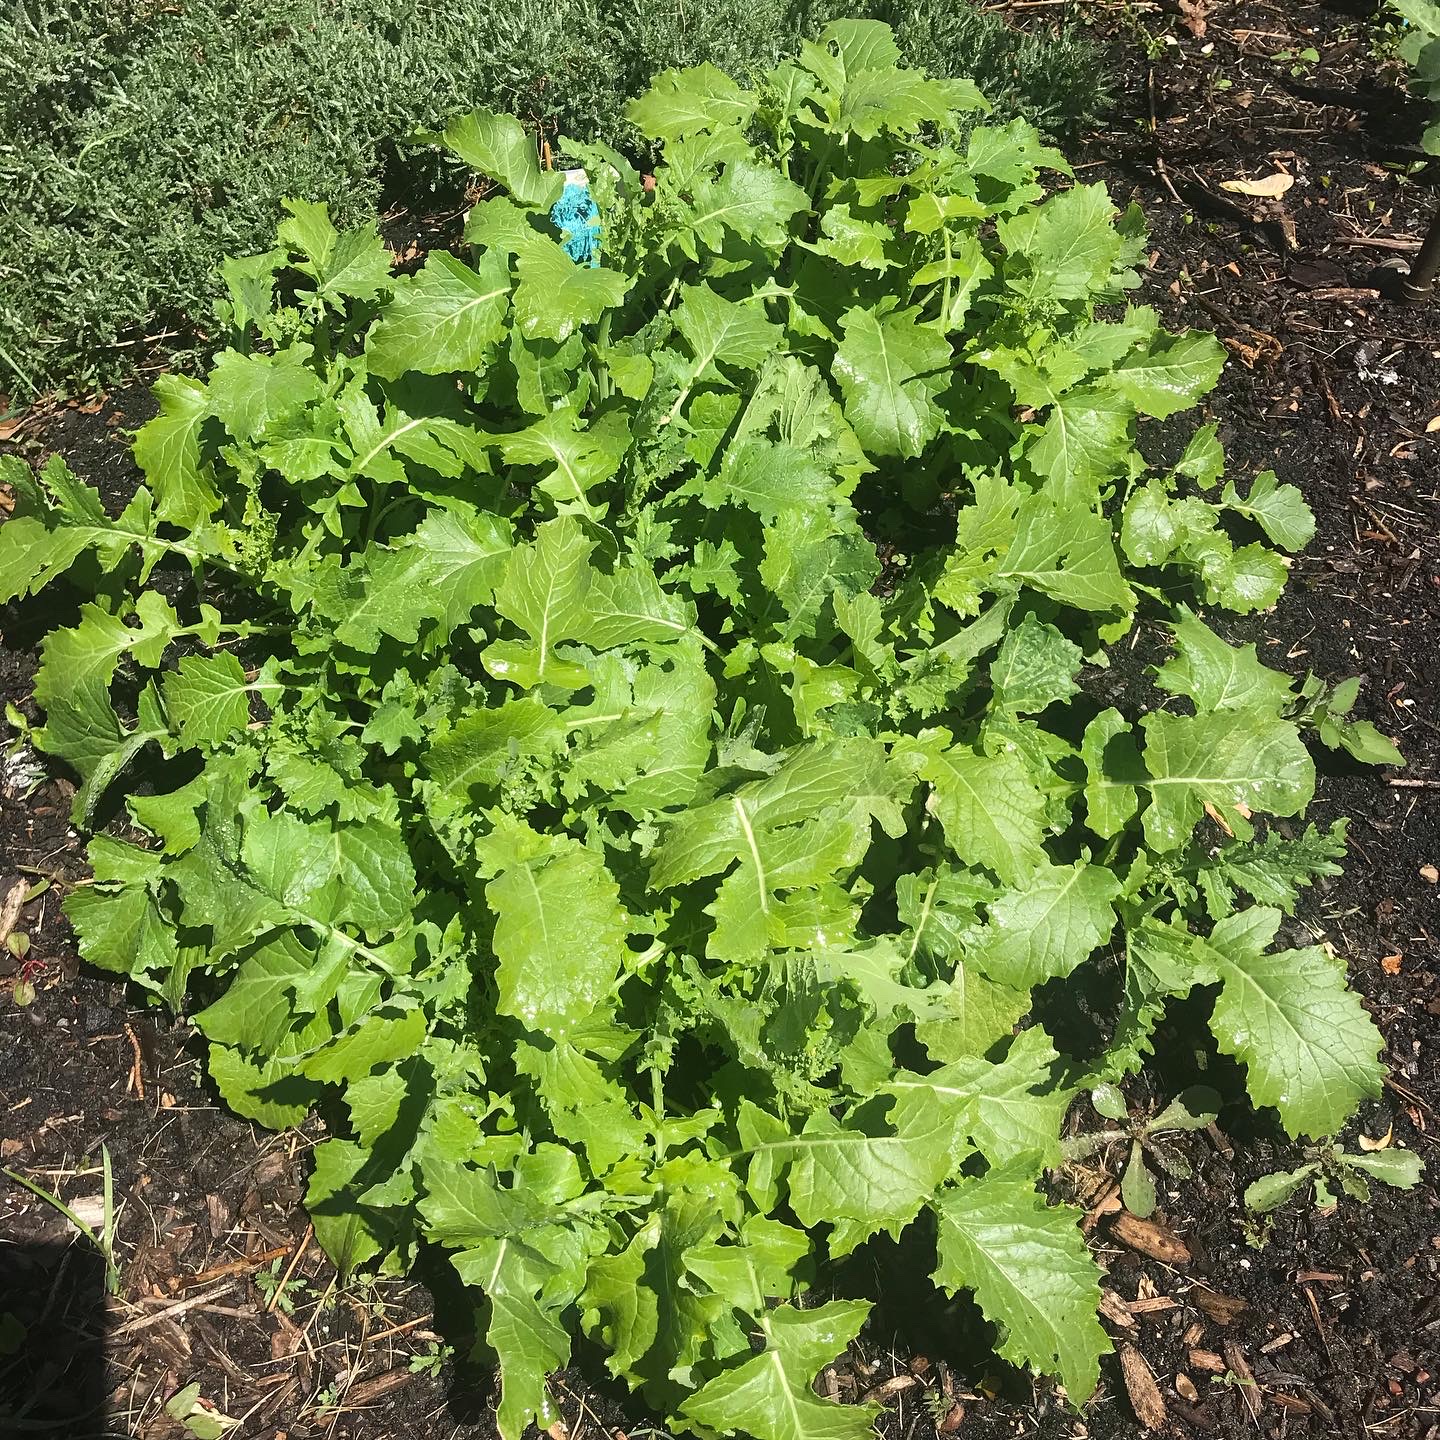 Broccoli rabe growing in the semicircular plot behind the raised garden beds, ready to start harvesting. Large, saw-tooth type leaves are growing in a cluster.